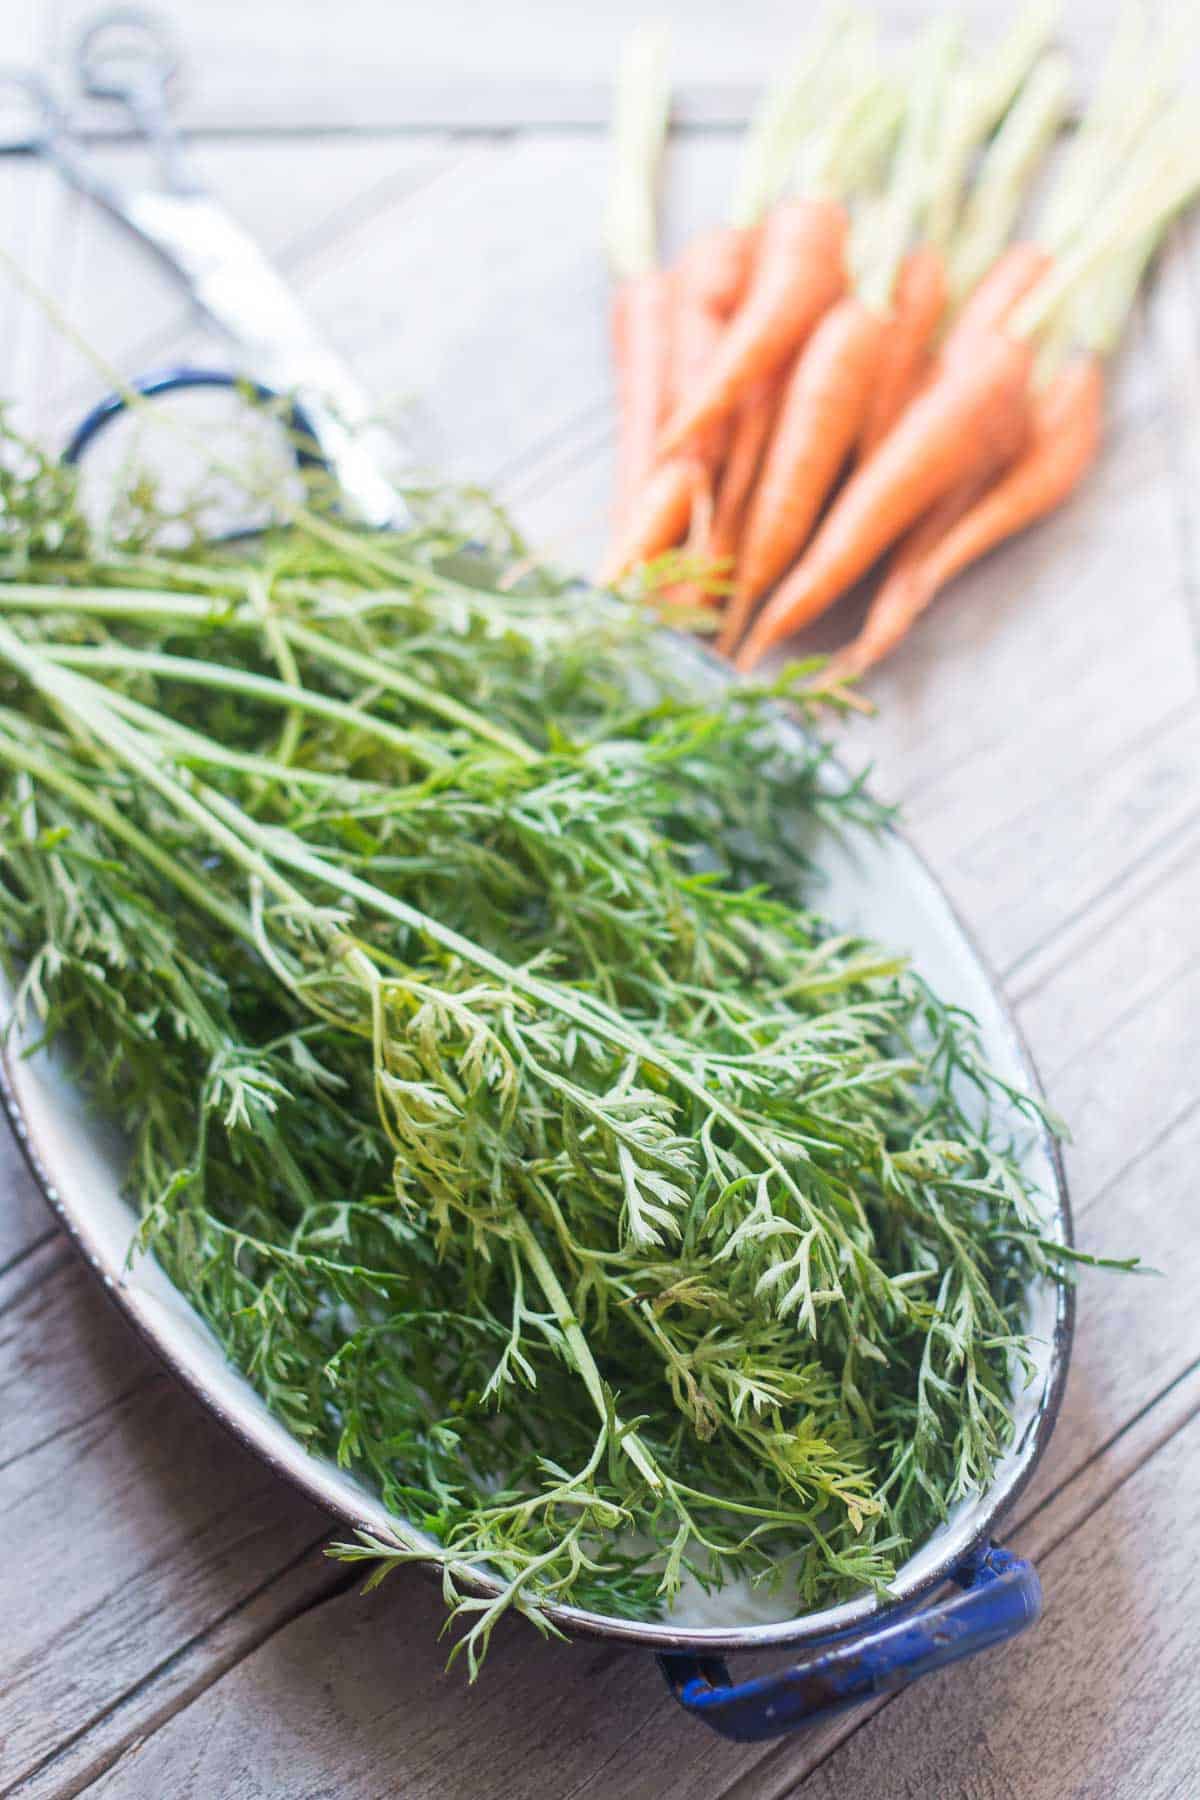 The carrot greens that are used to make the Chimichurri in this recipe.